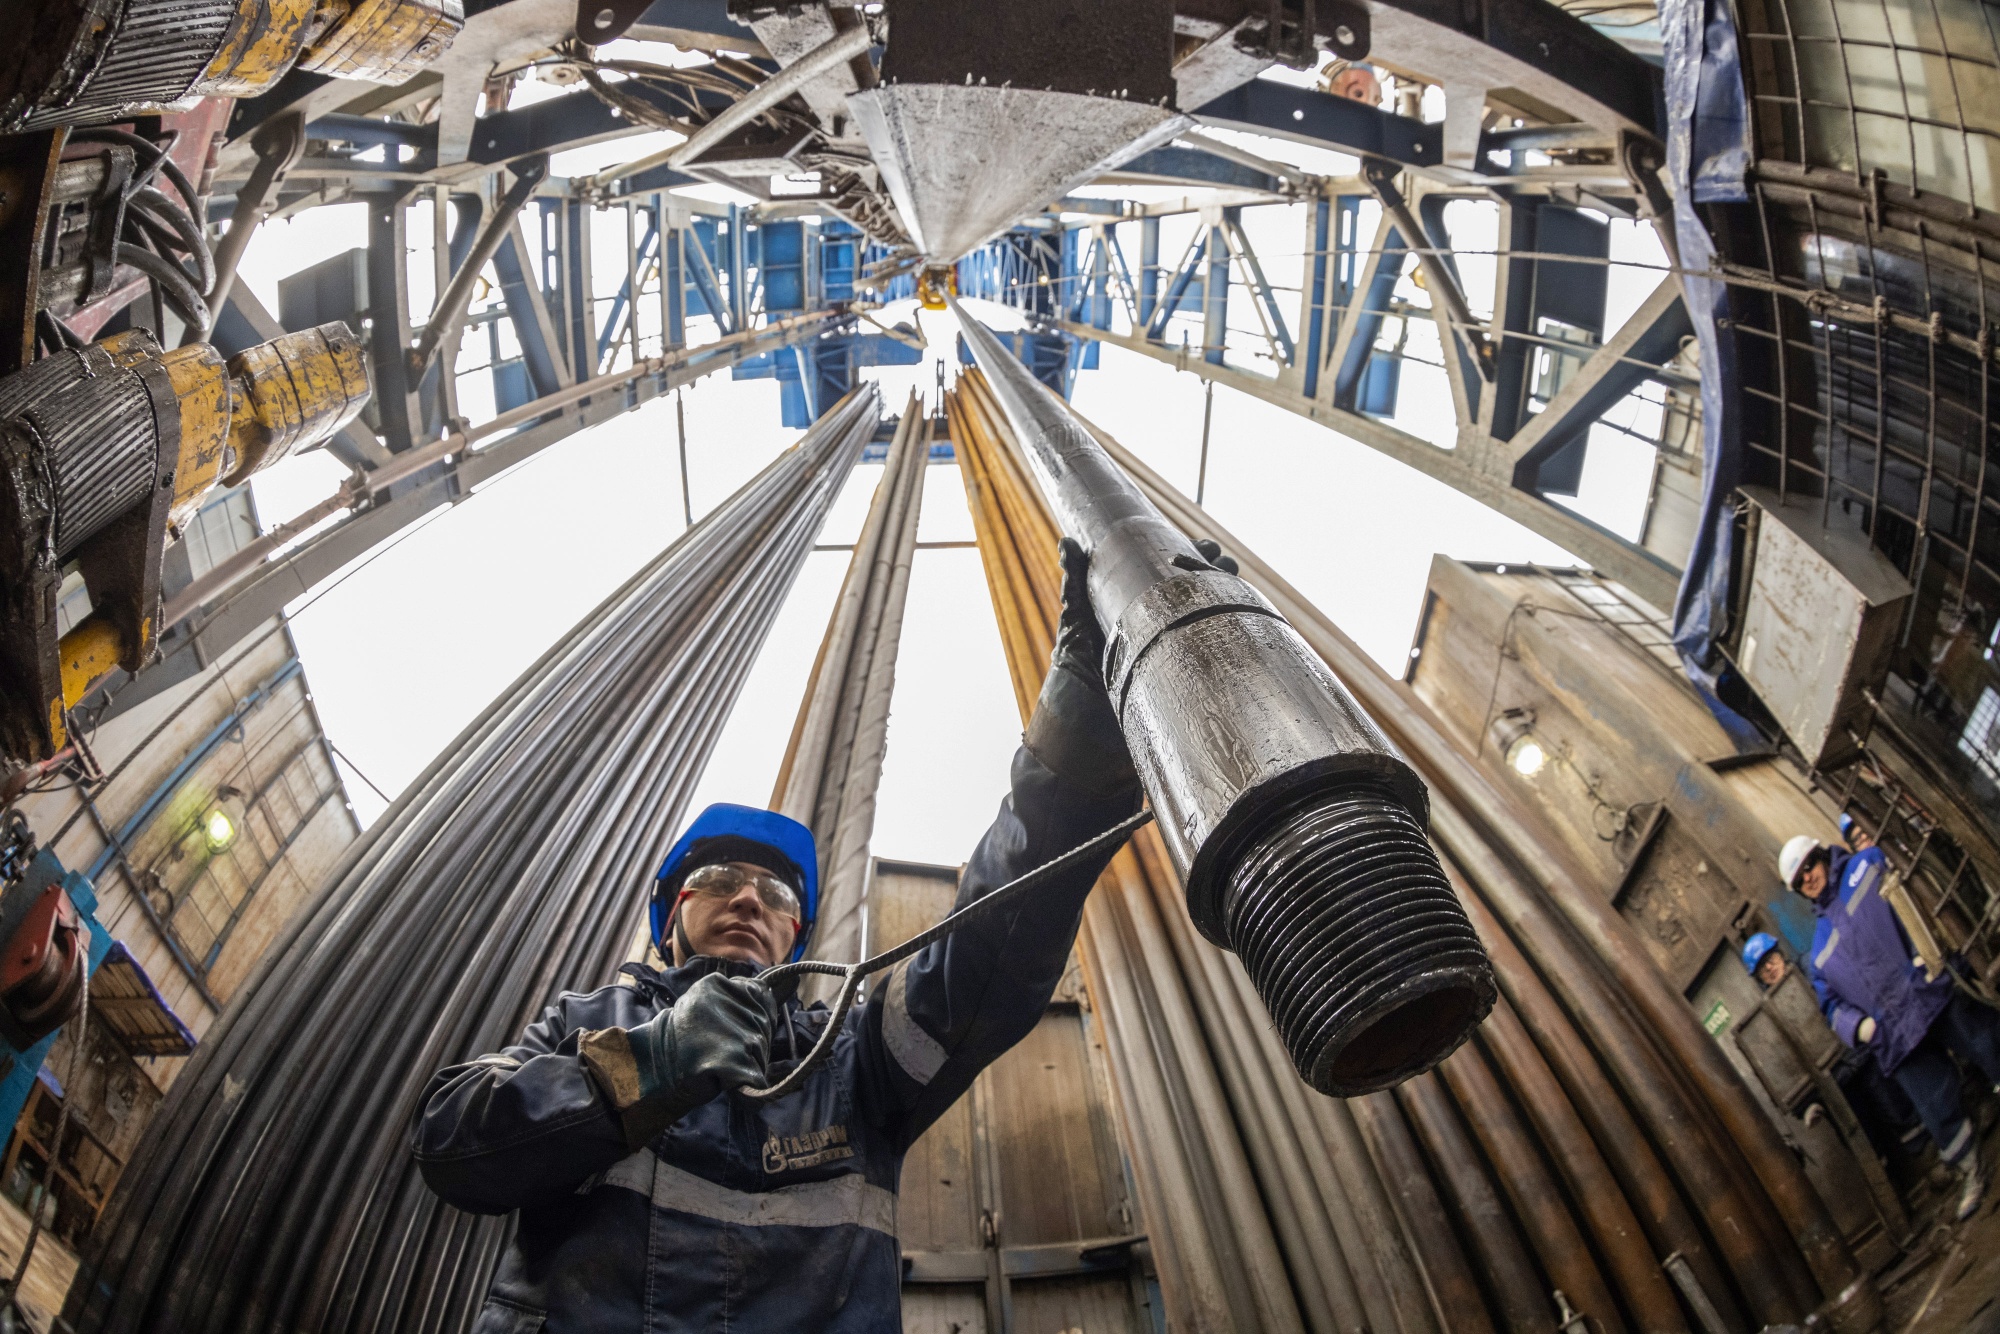 A worker guides a drilling pipe at&nbsp;the Gazprom Chayandinskoye oil, gas and condensate field&nbsp;near Lensk, Russia, on Oct. 13.